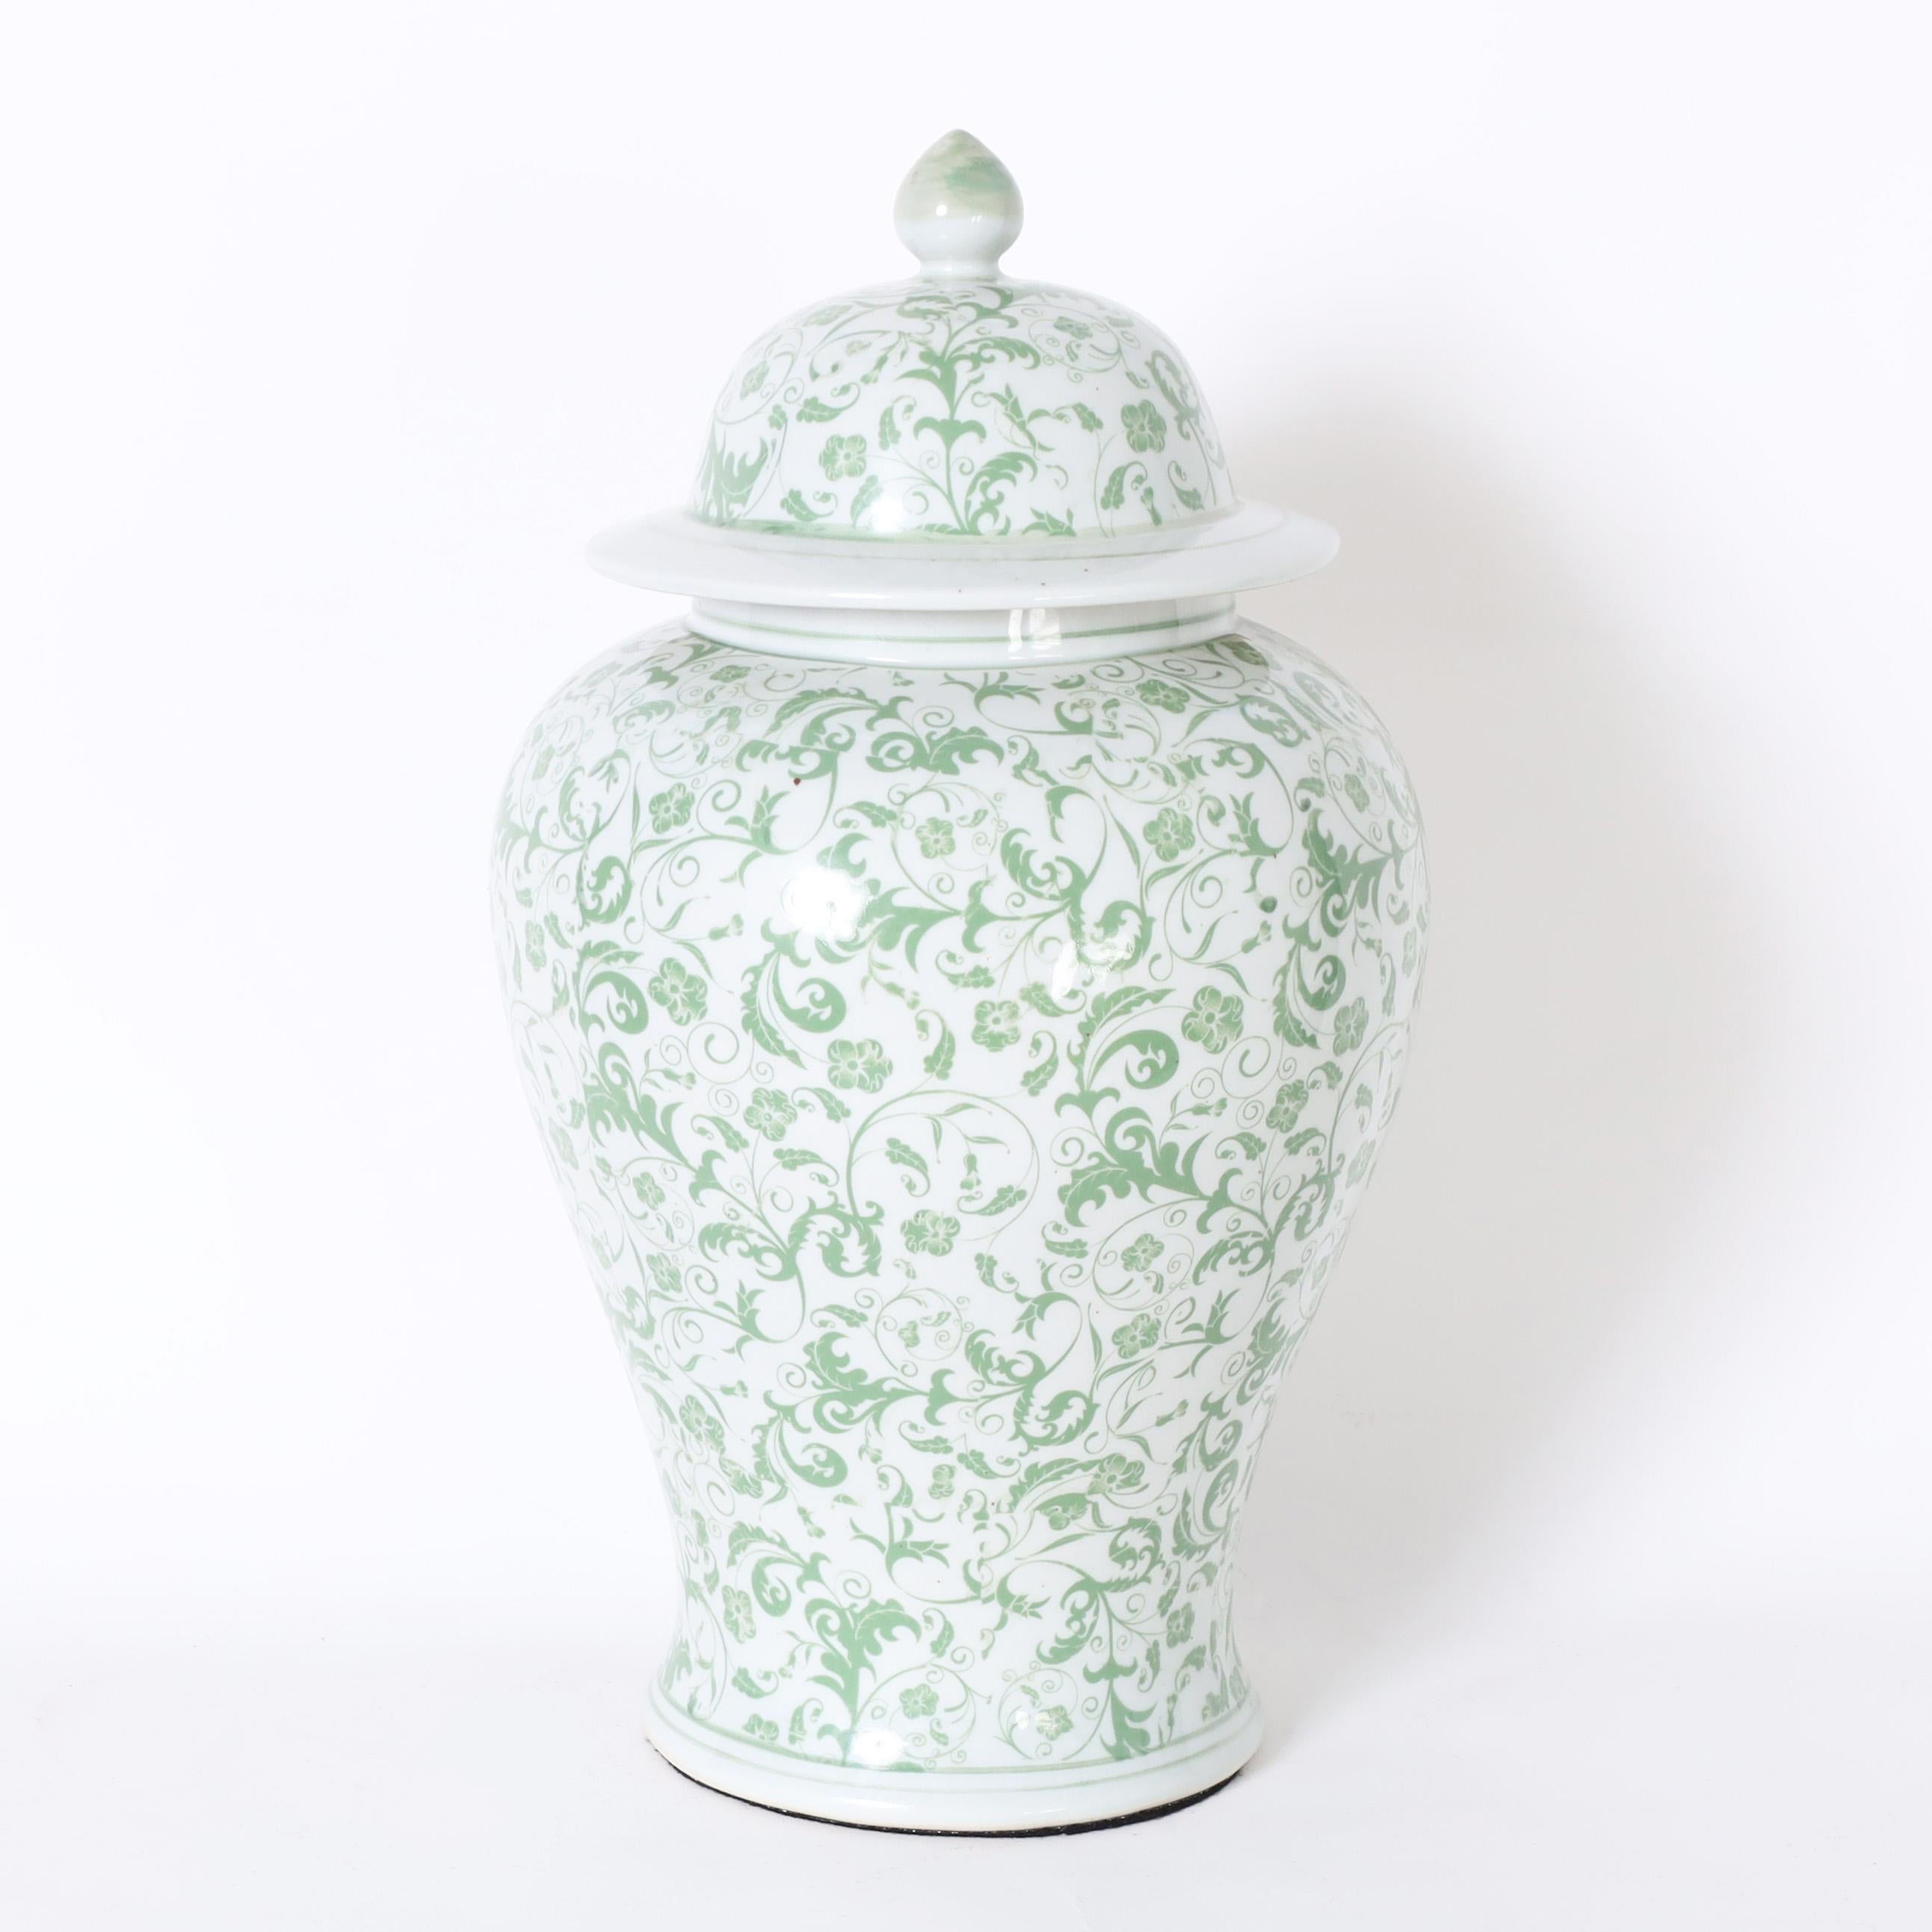 Unusual pair of Chinese green and white porcelain lidded urns or jars with classic form hand decorated with delicate flowers and leaves.